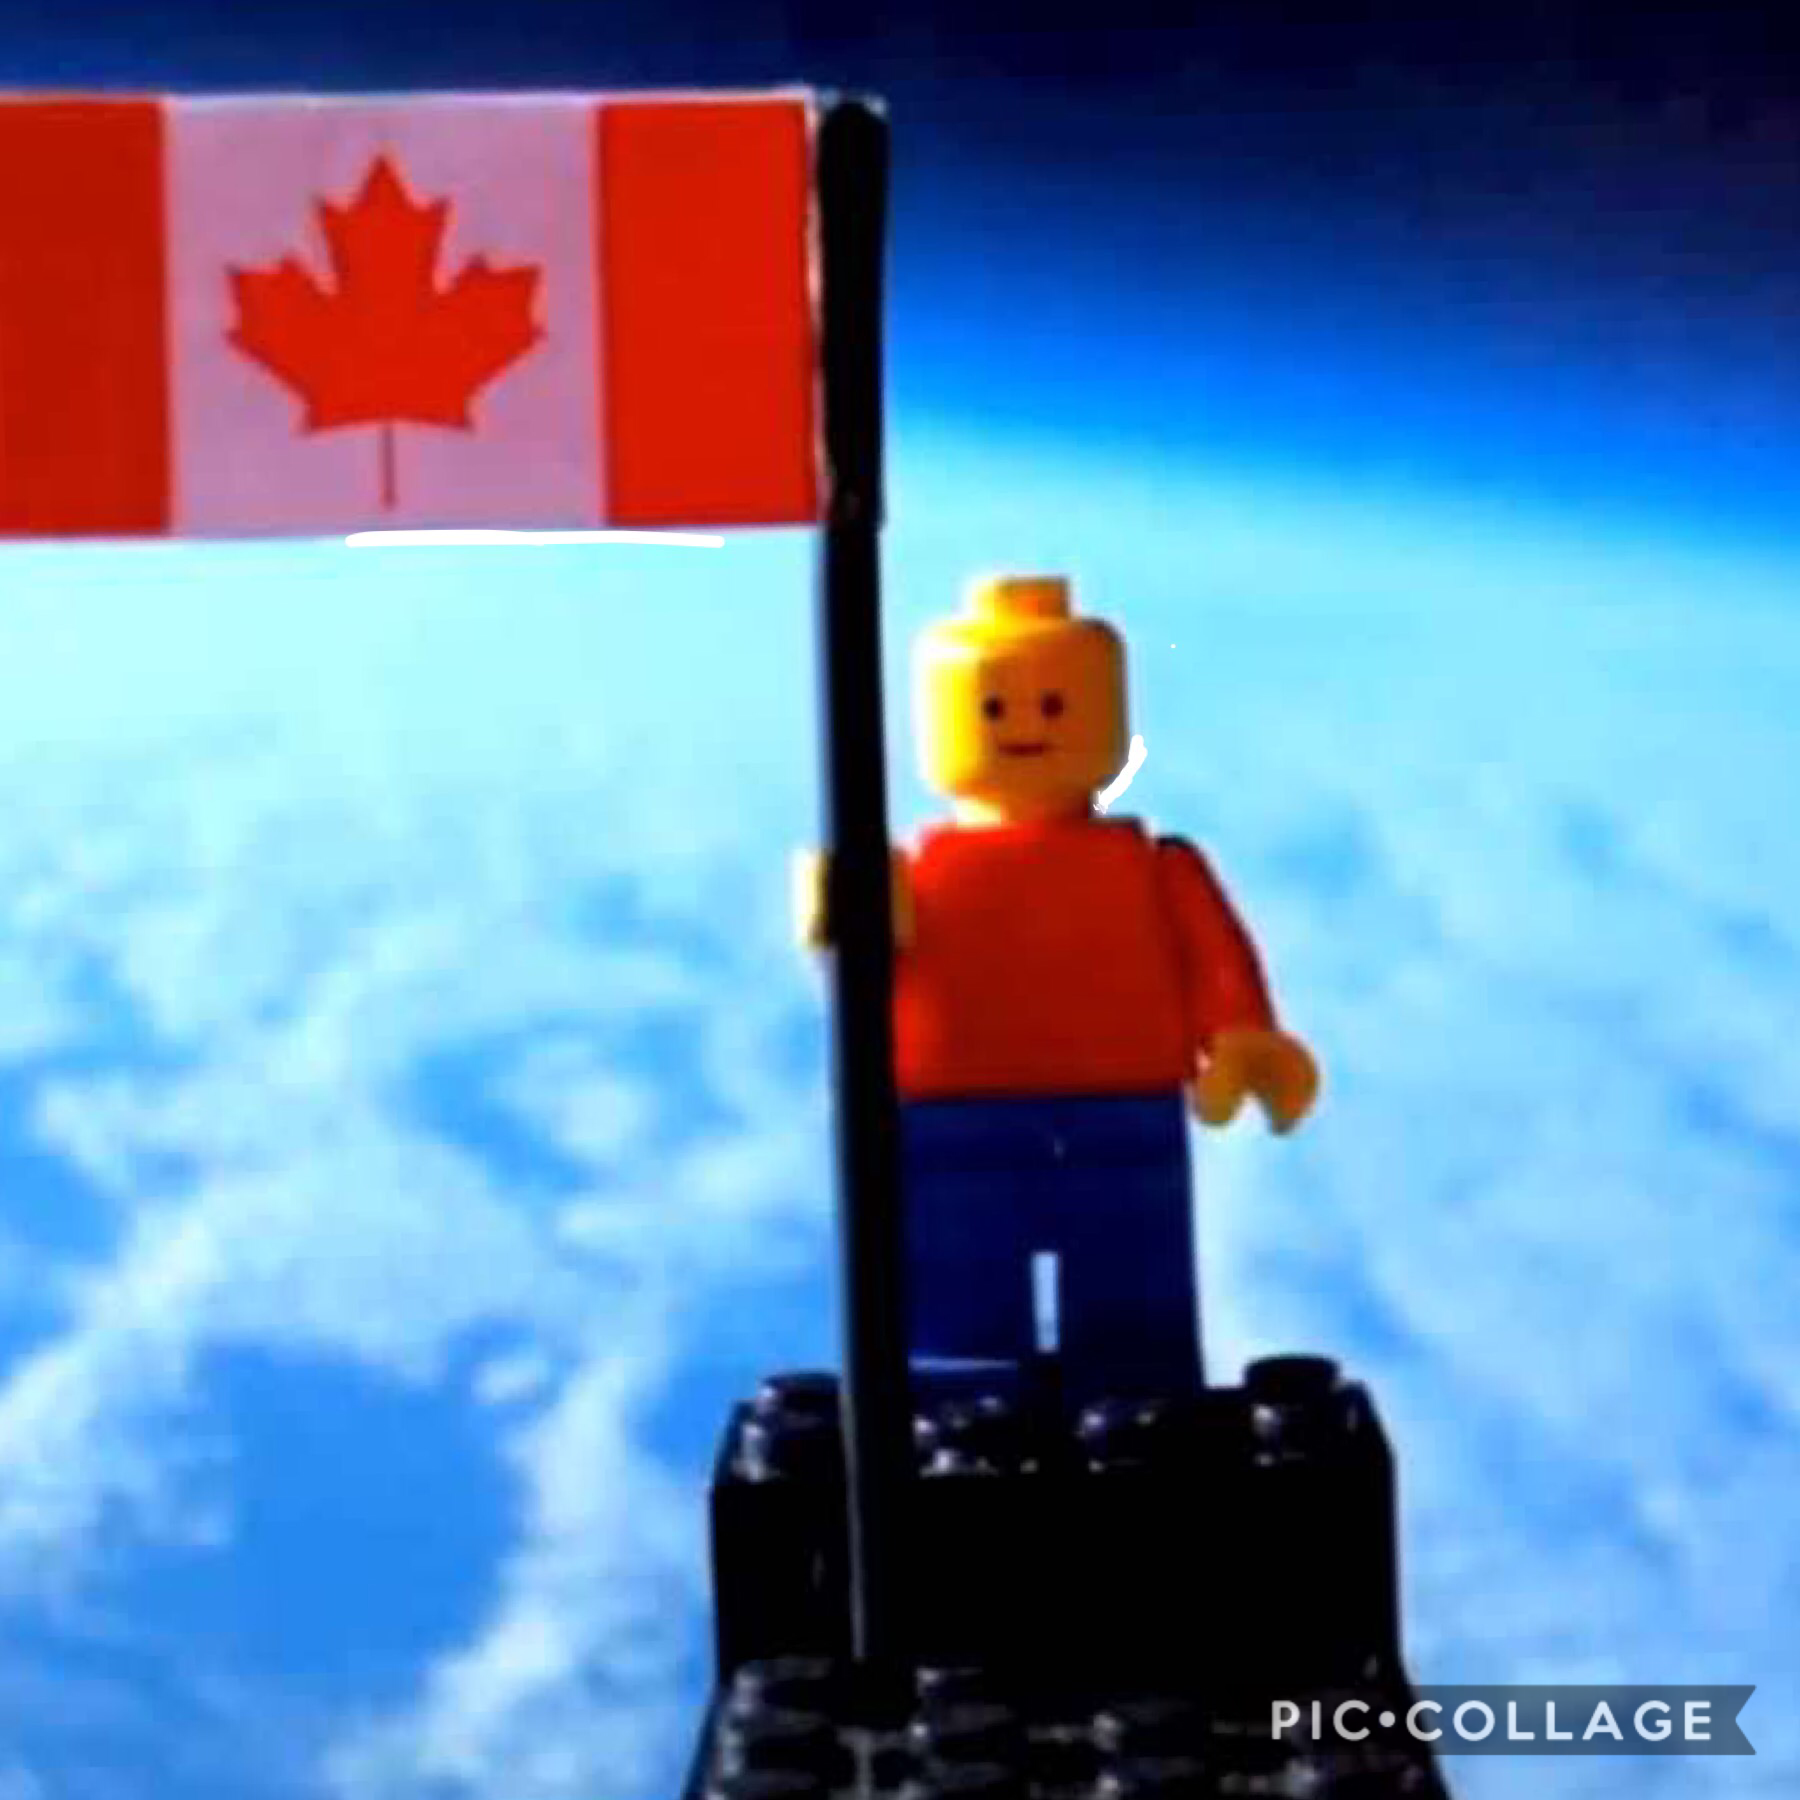 Have you heard of the LEGO guy in space